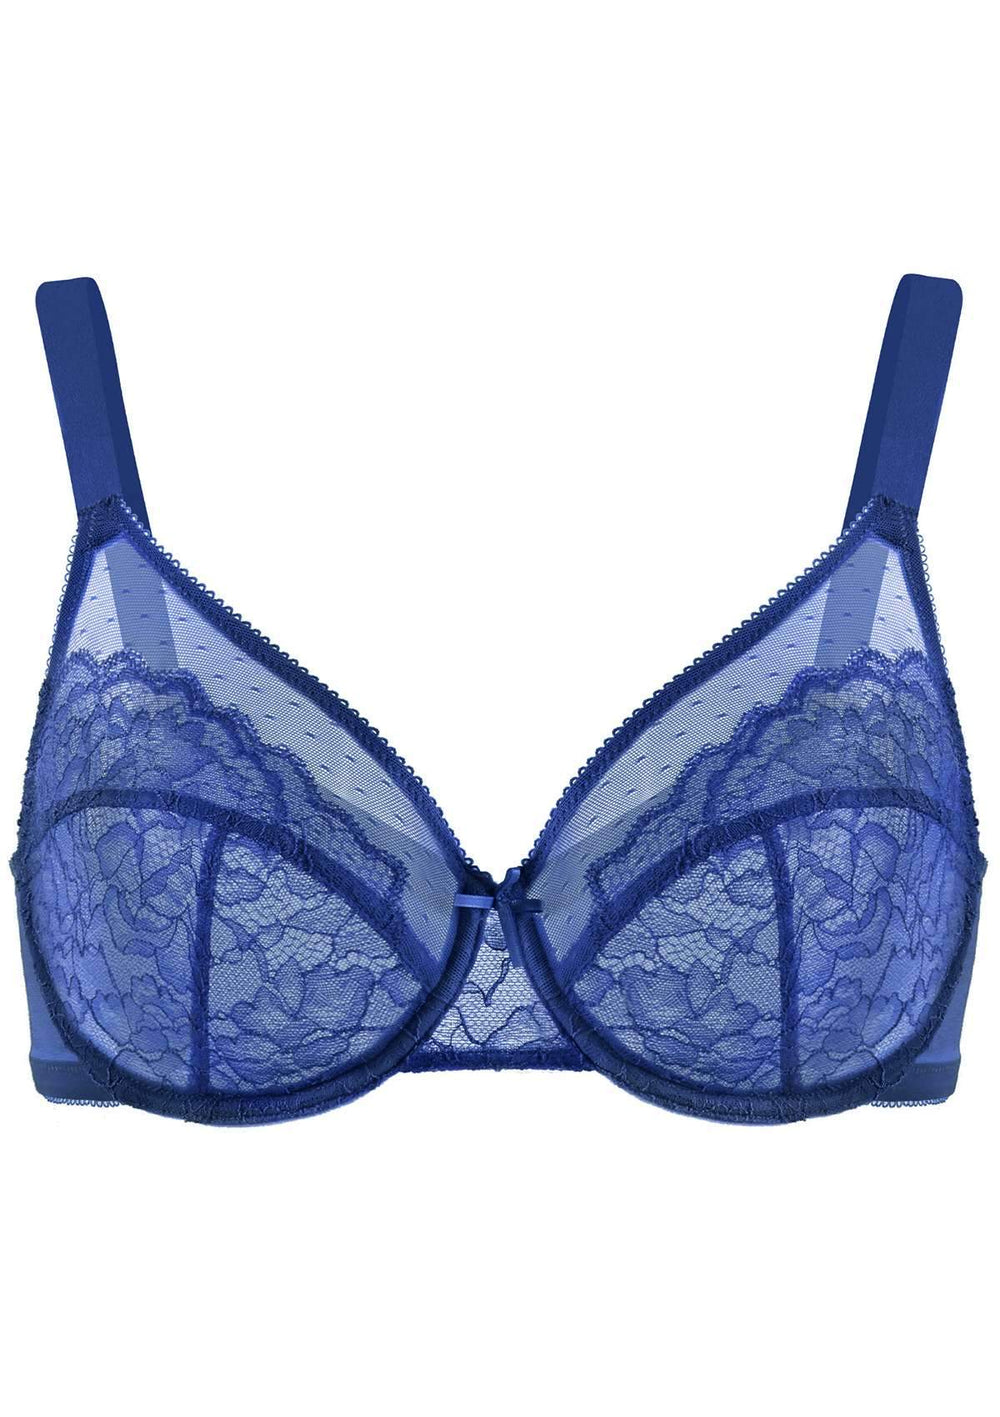 Buy A-GG Pastel Blue Recycled Lace Full Cup Non Padded Bra - 32A